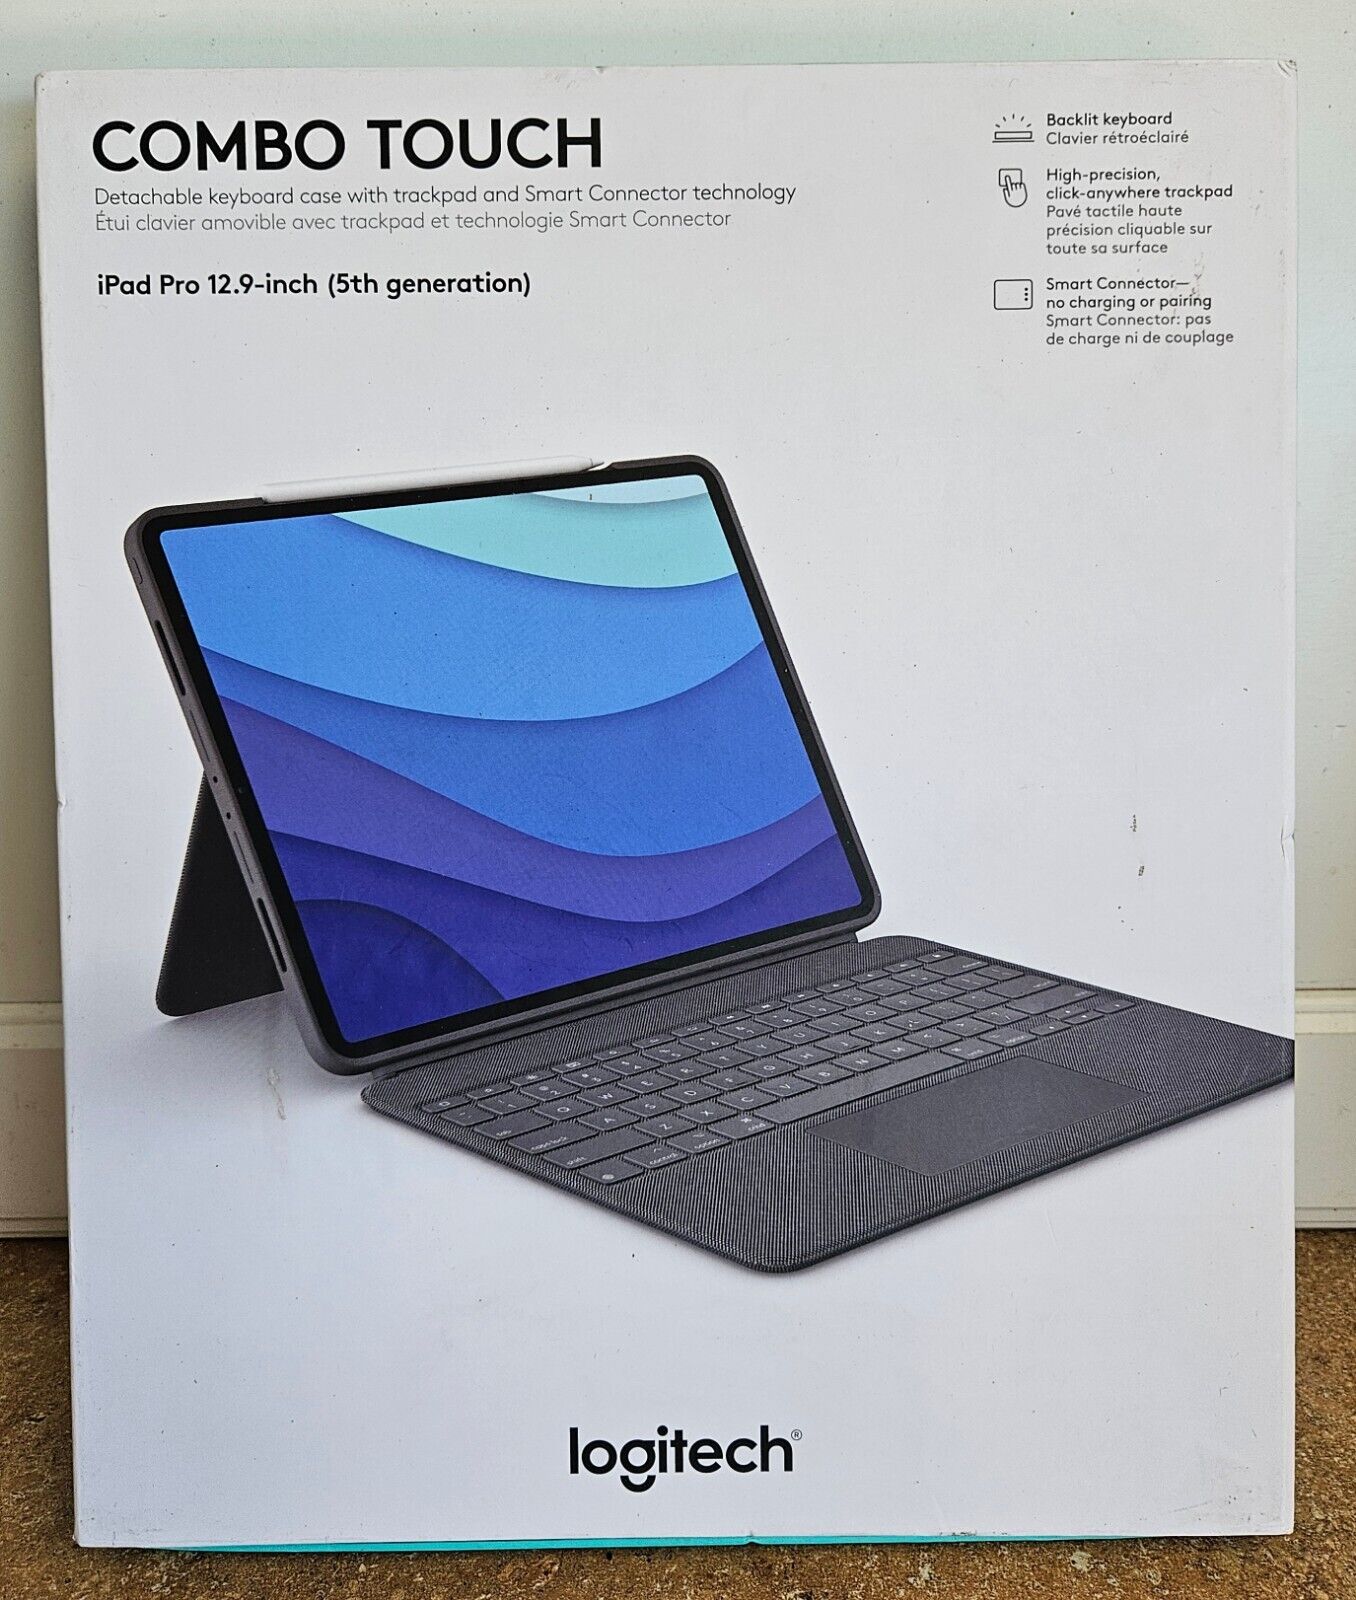 LOGITECH COMBO TOUCH iPAD PRO 12.9 INCH 5TH GENERATION NEW IN BOX 